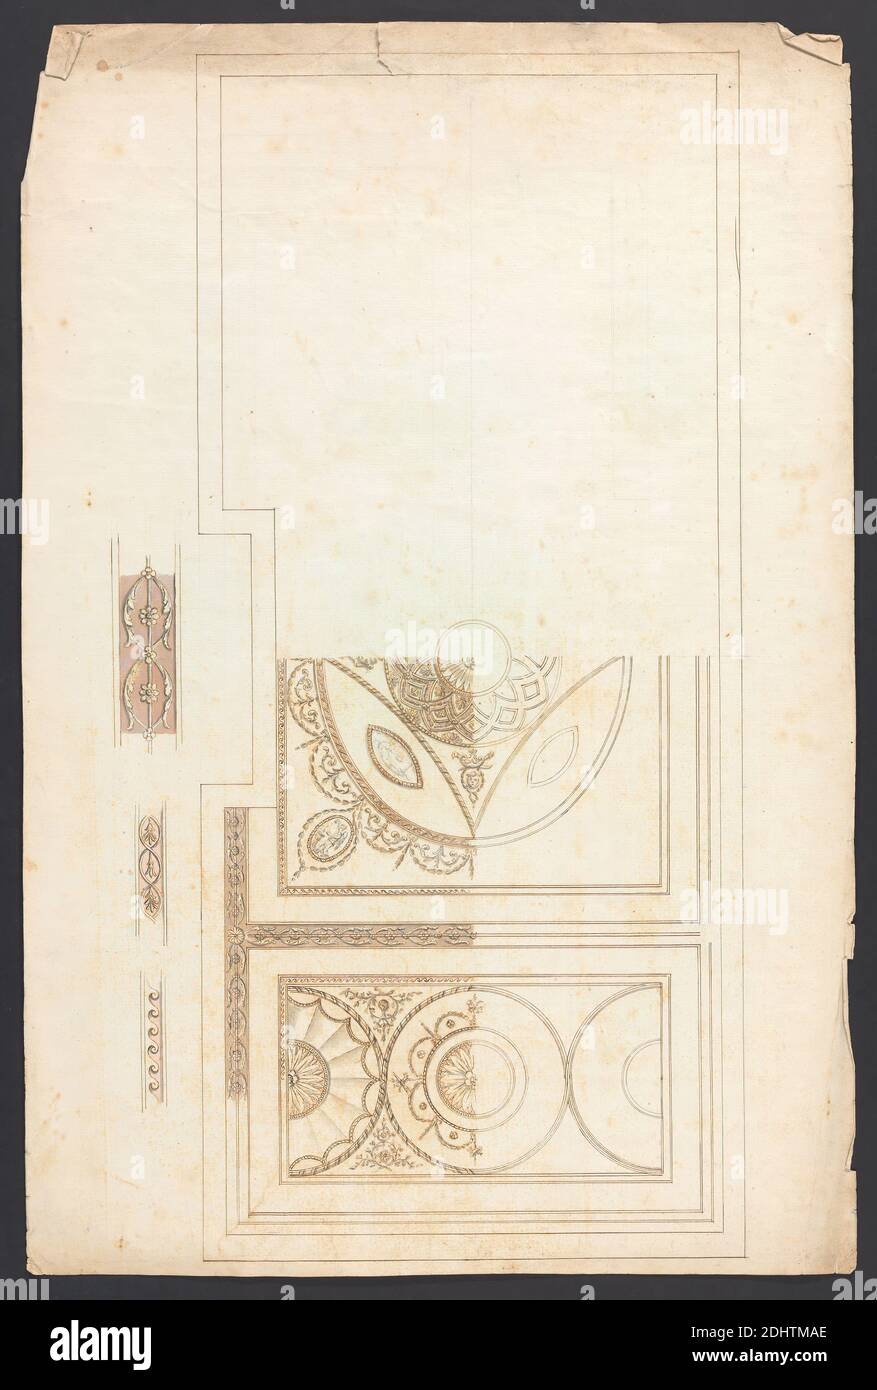 Cobham Hall, Kent: Ceiling Decoration, James Wyatt, 1746–1813, British, ca. 1790, Graphite, pen and brown ink and watercolor on moderately thick, moderately textured, cream laid paper, Sheet: 13 11/16 × 20 9/16 inches (34.8 × 52.2 cm), architectural subject, ceilings, designs, festoons, Neoclassical, roundels, Cobham, Cobham Hall, England, Kent, United Kingdom Stock Photo